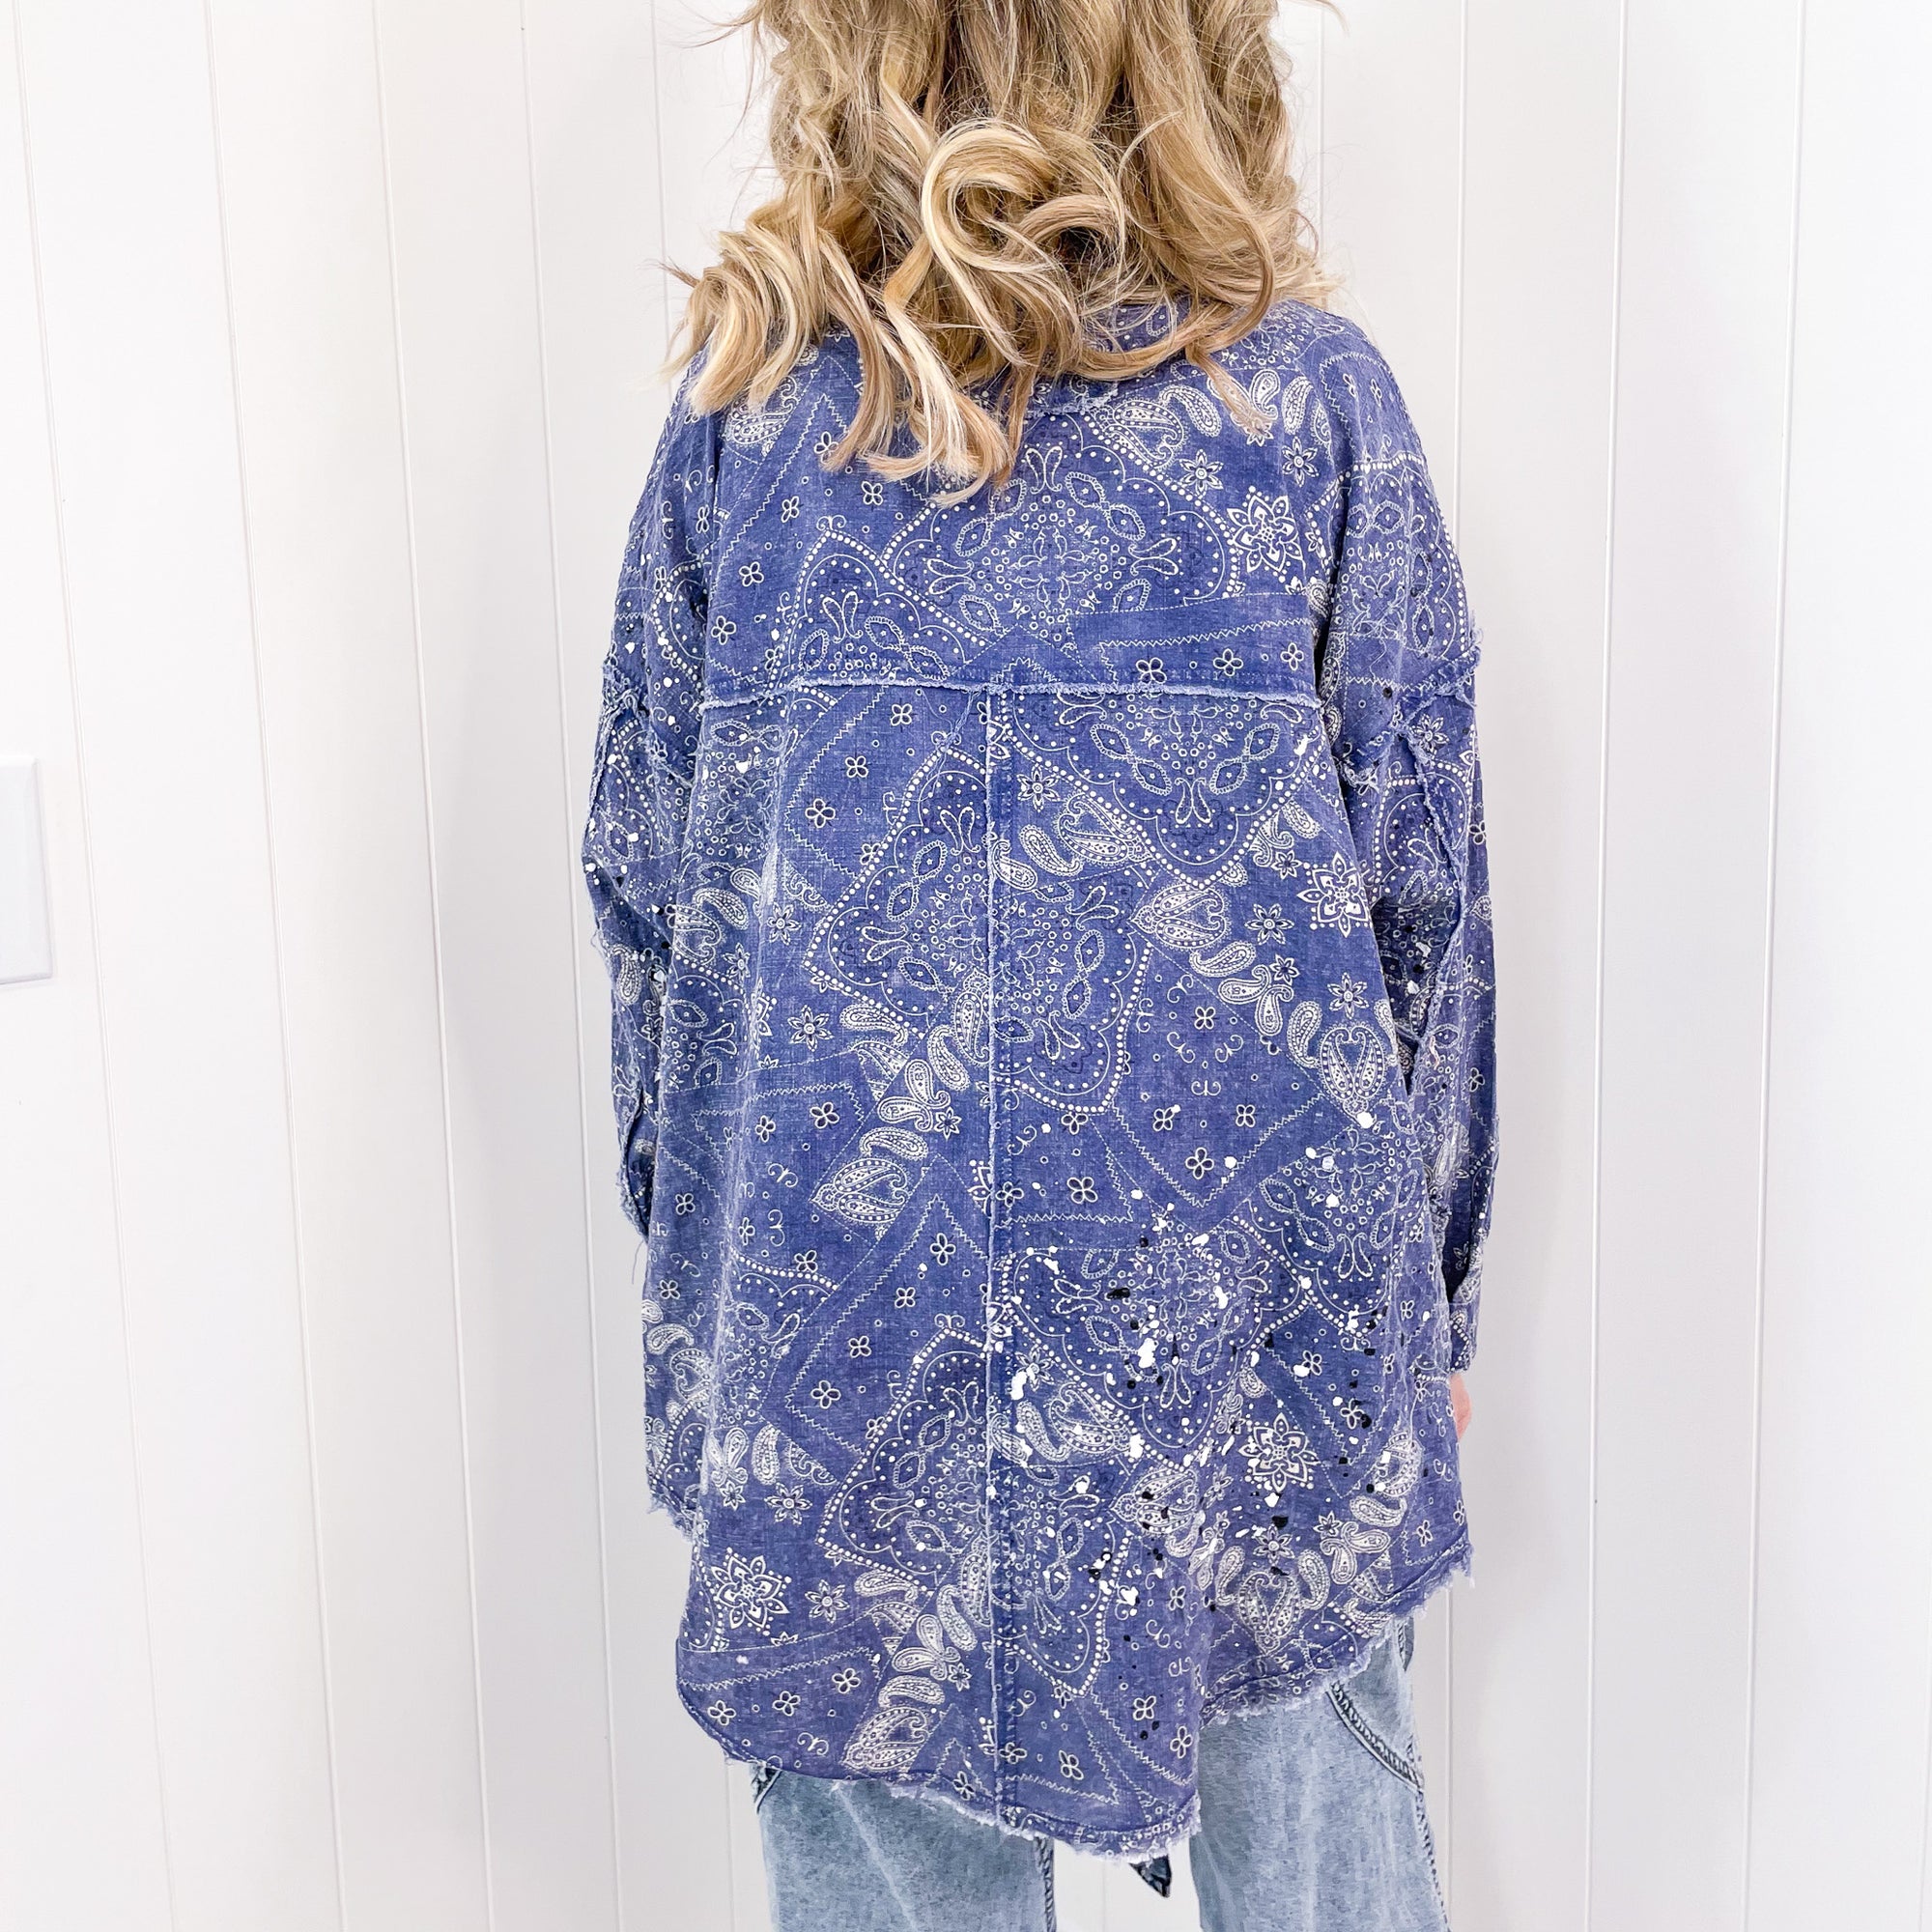 Work with me Blue Paisley Paint Splatter Button up Top - Boujee Boutique 